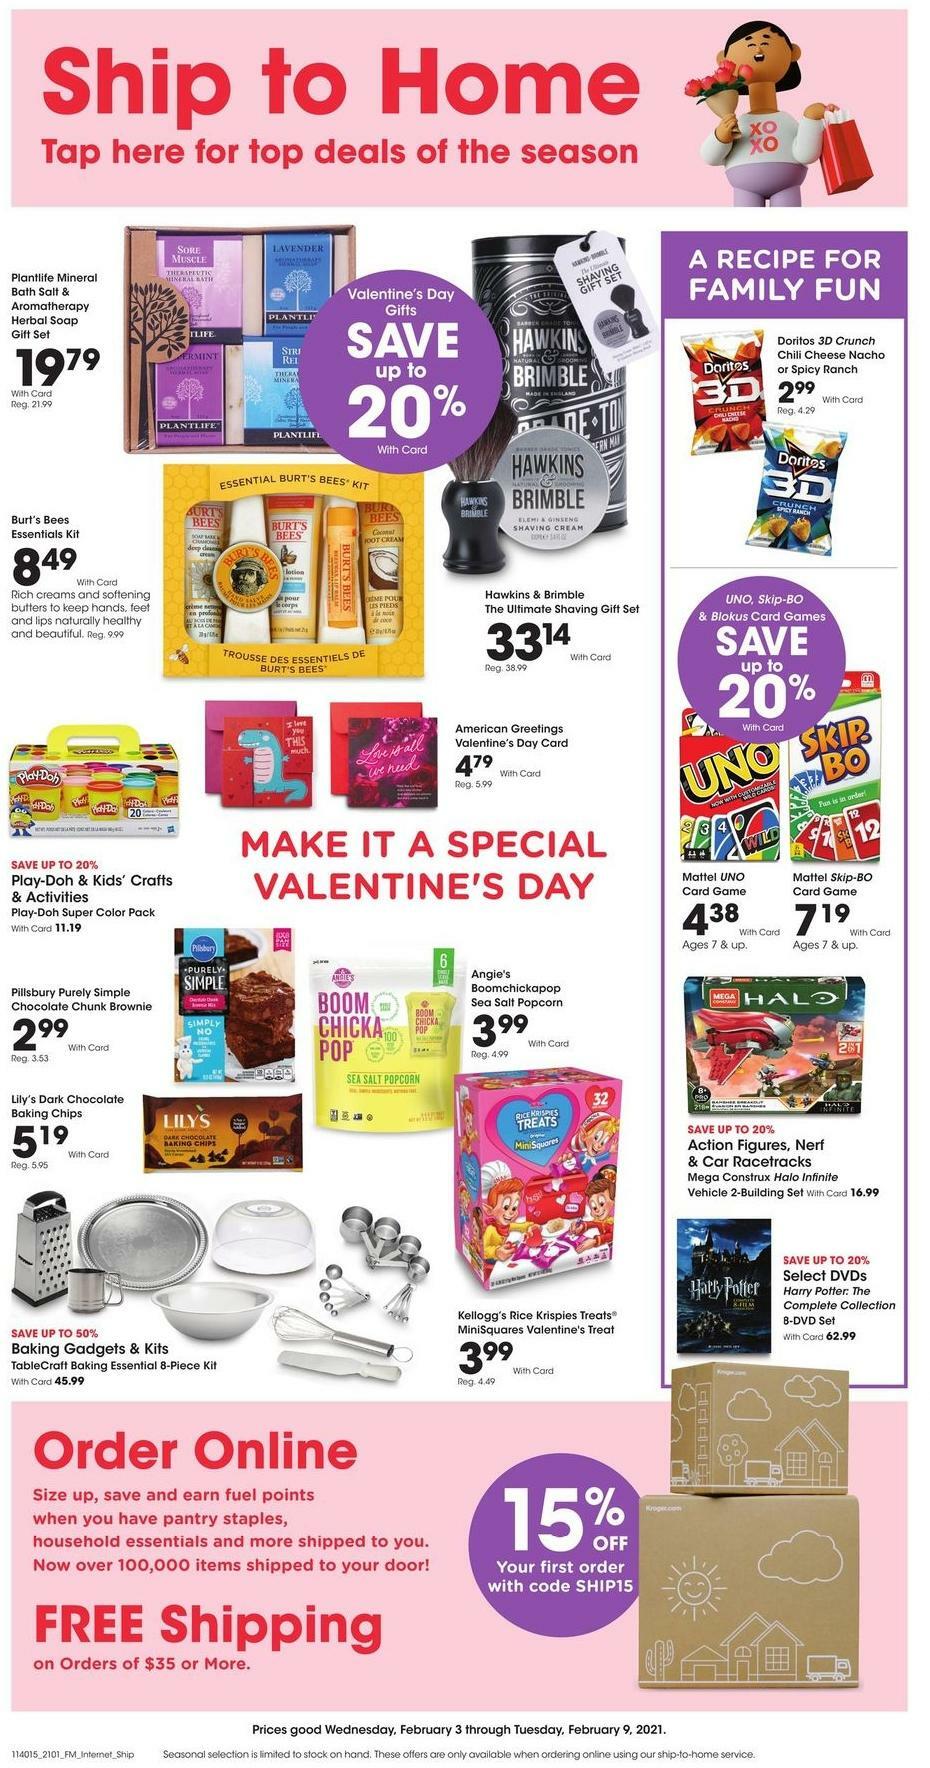 Kroger Ship to Home Weekly Ad from February 3